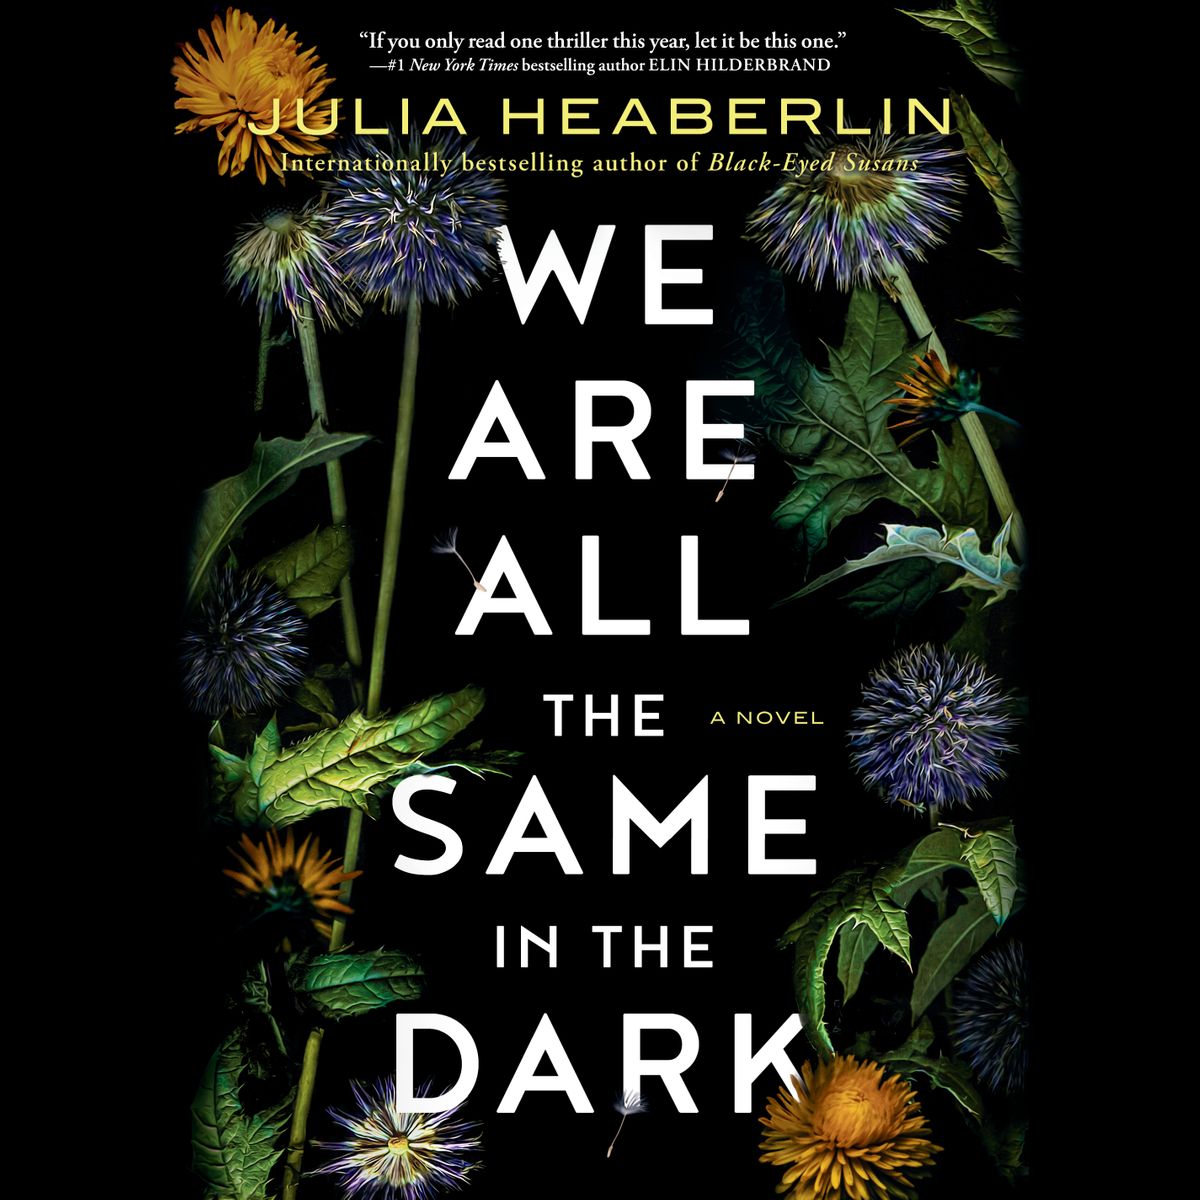 Themes in “We Are All the Same in the Dark” by Julia Heaberlin and Review